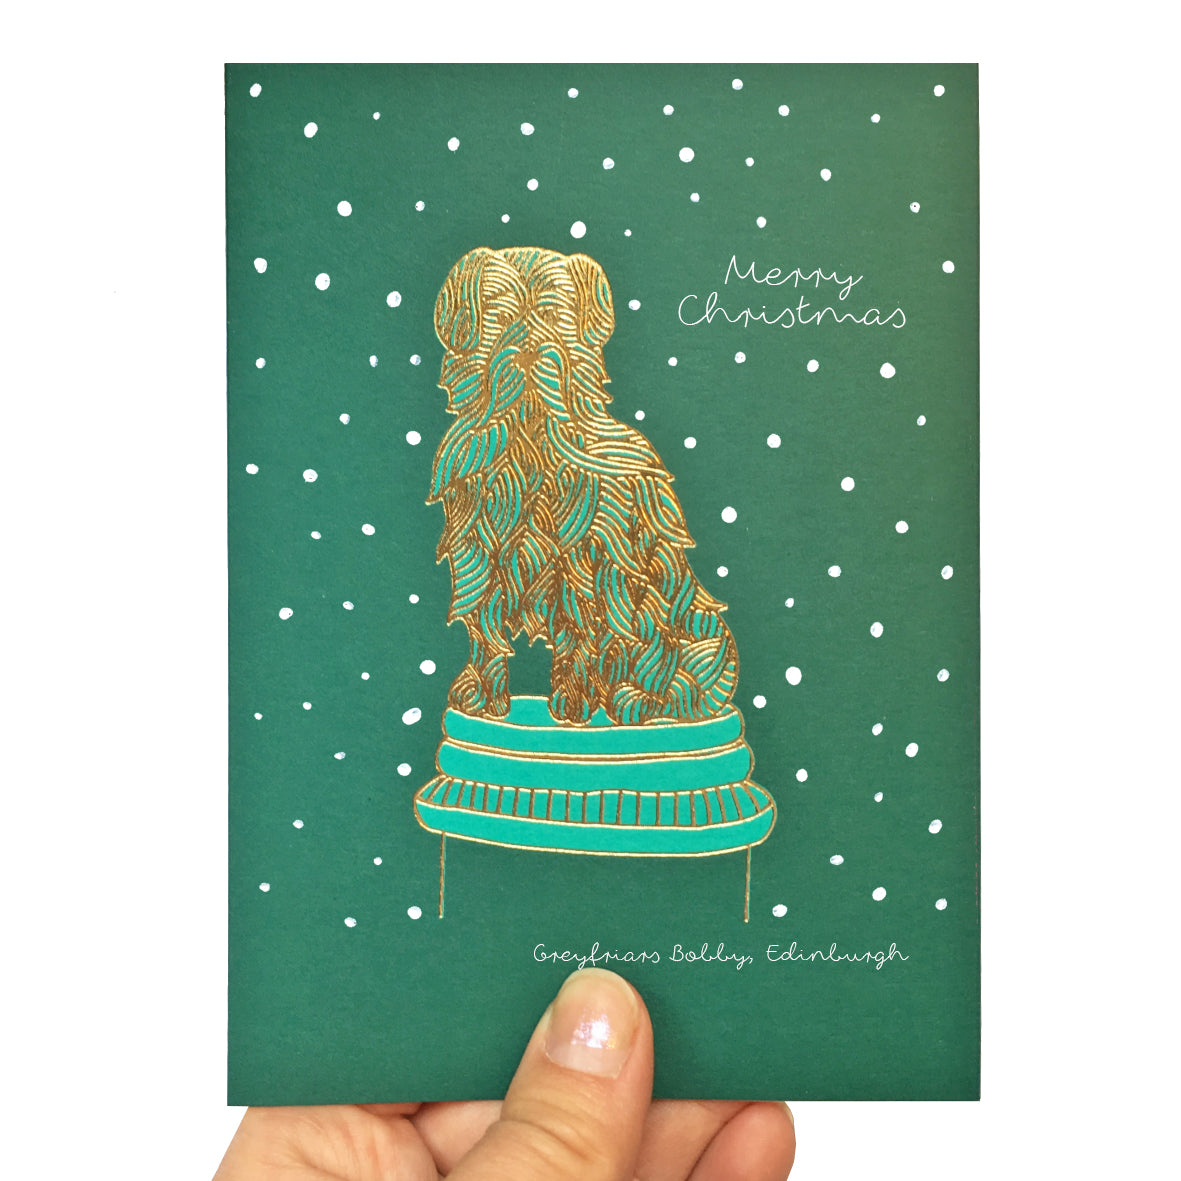 Turquoise Scottish Christmas card featuring greyfriars bobby